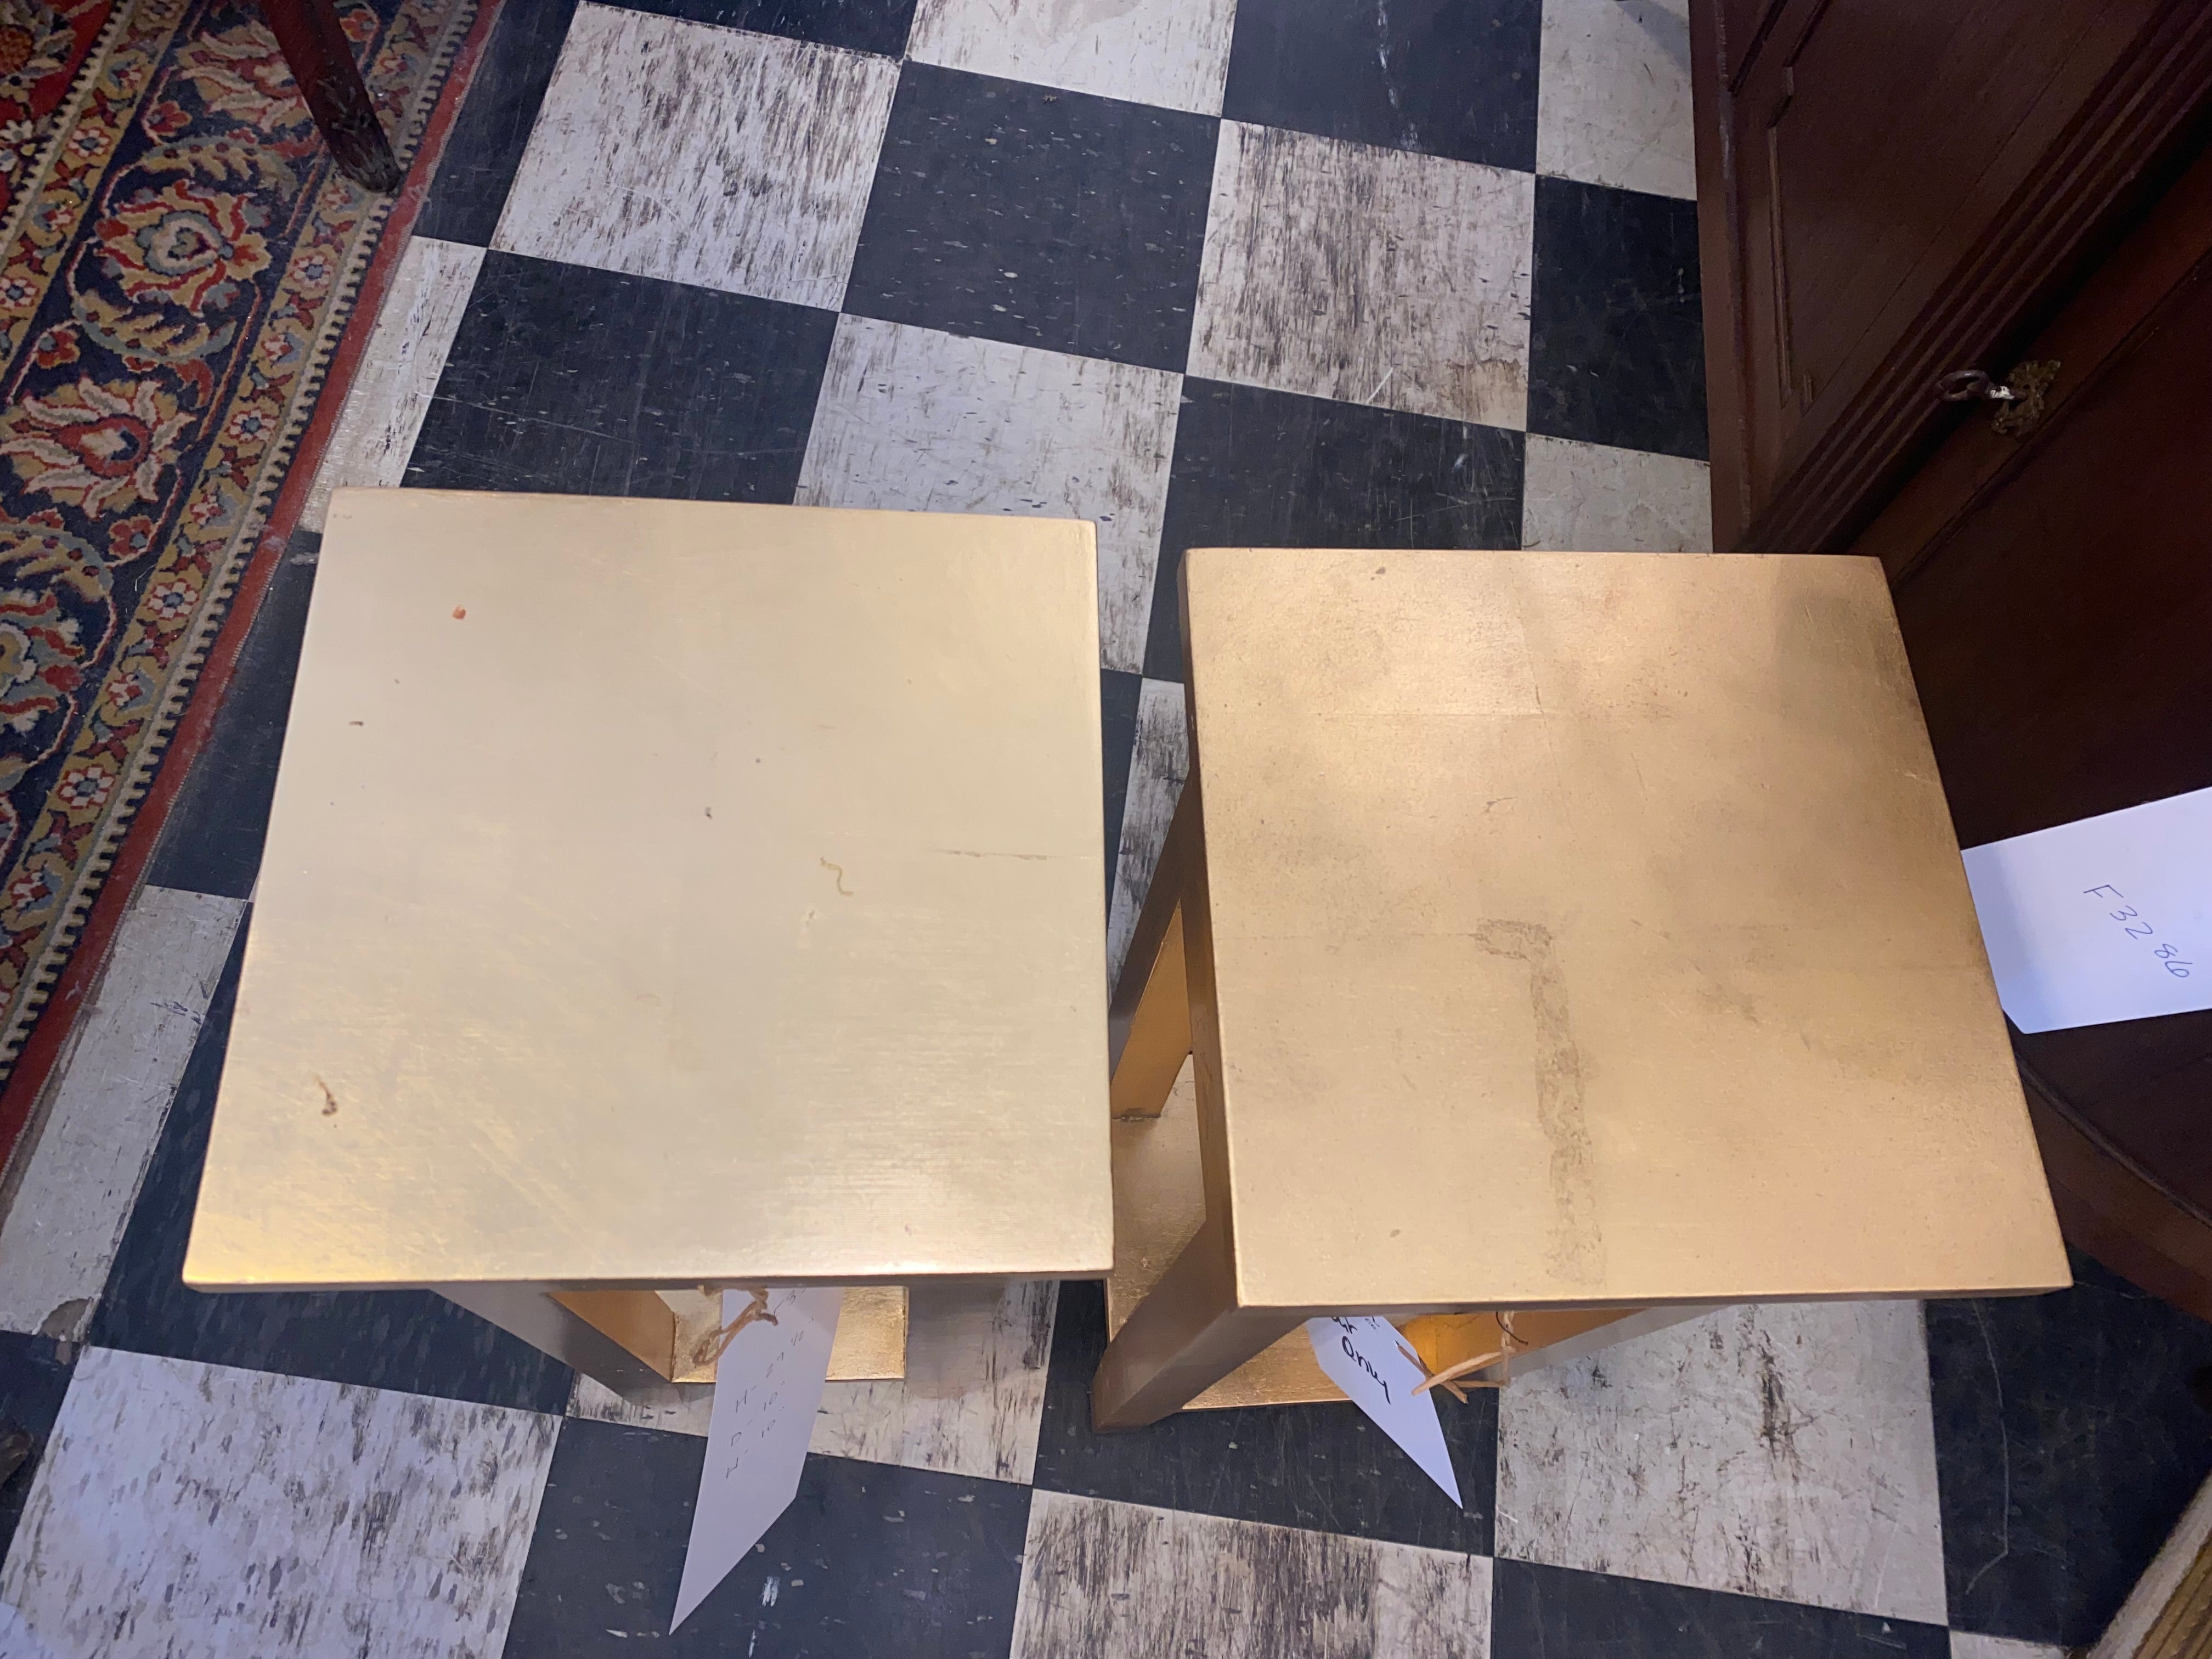 Pair of Petite Gold Tables New